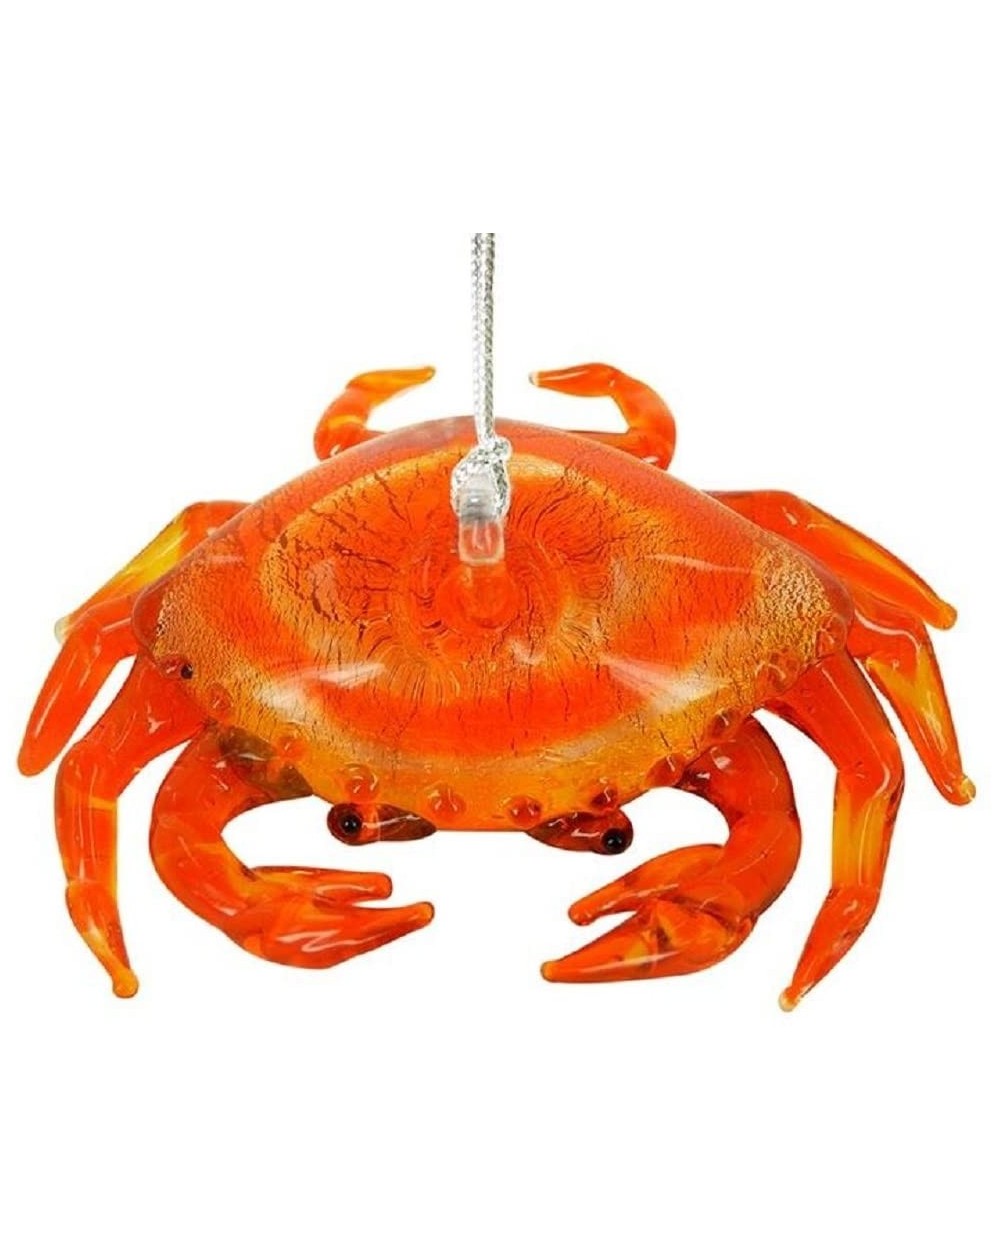 Ornaments Glassdelights Red Crab Glass Christmas Tree Ornament Sea Life Animal Decoration - CL1806CHN23 $21.08